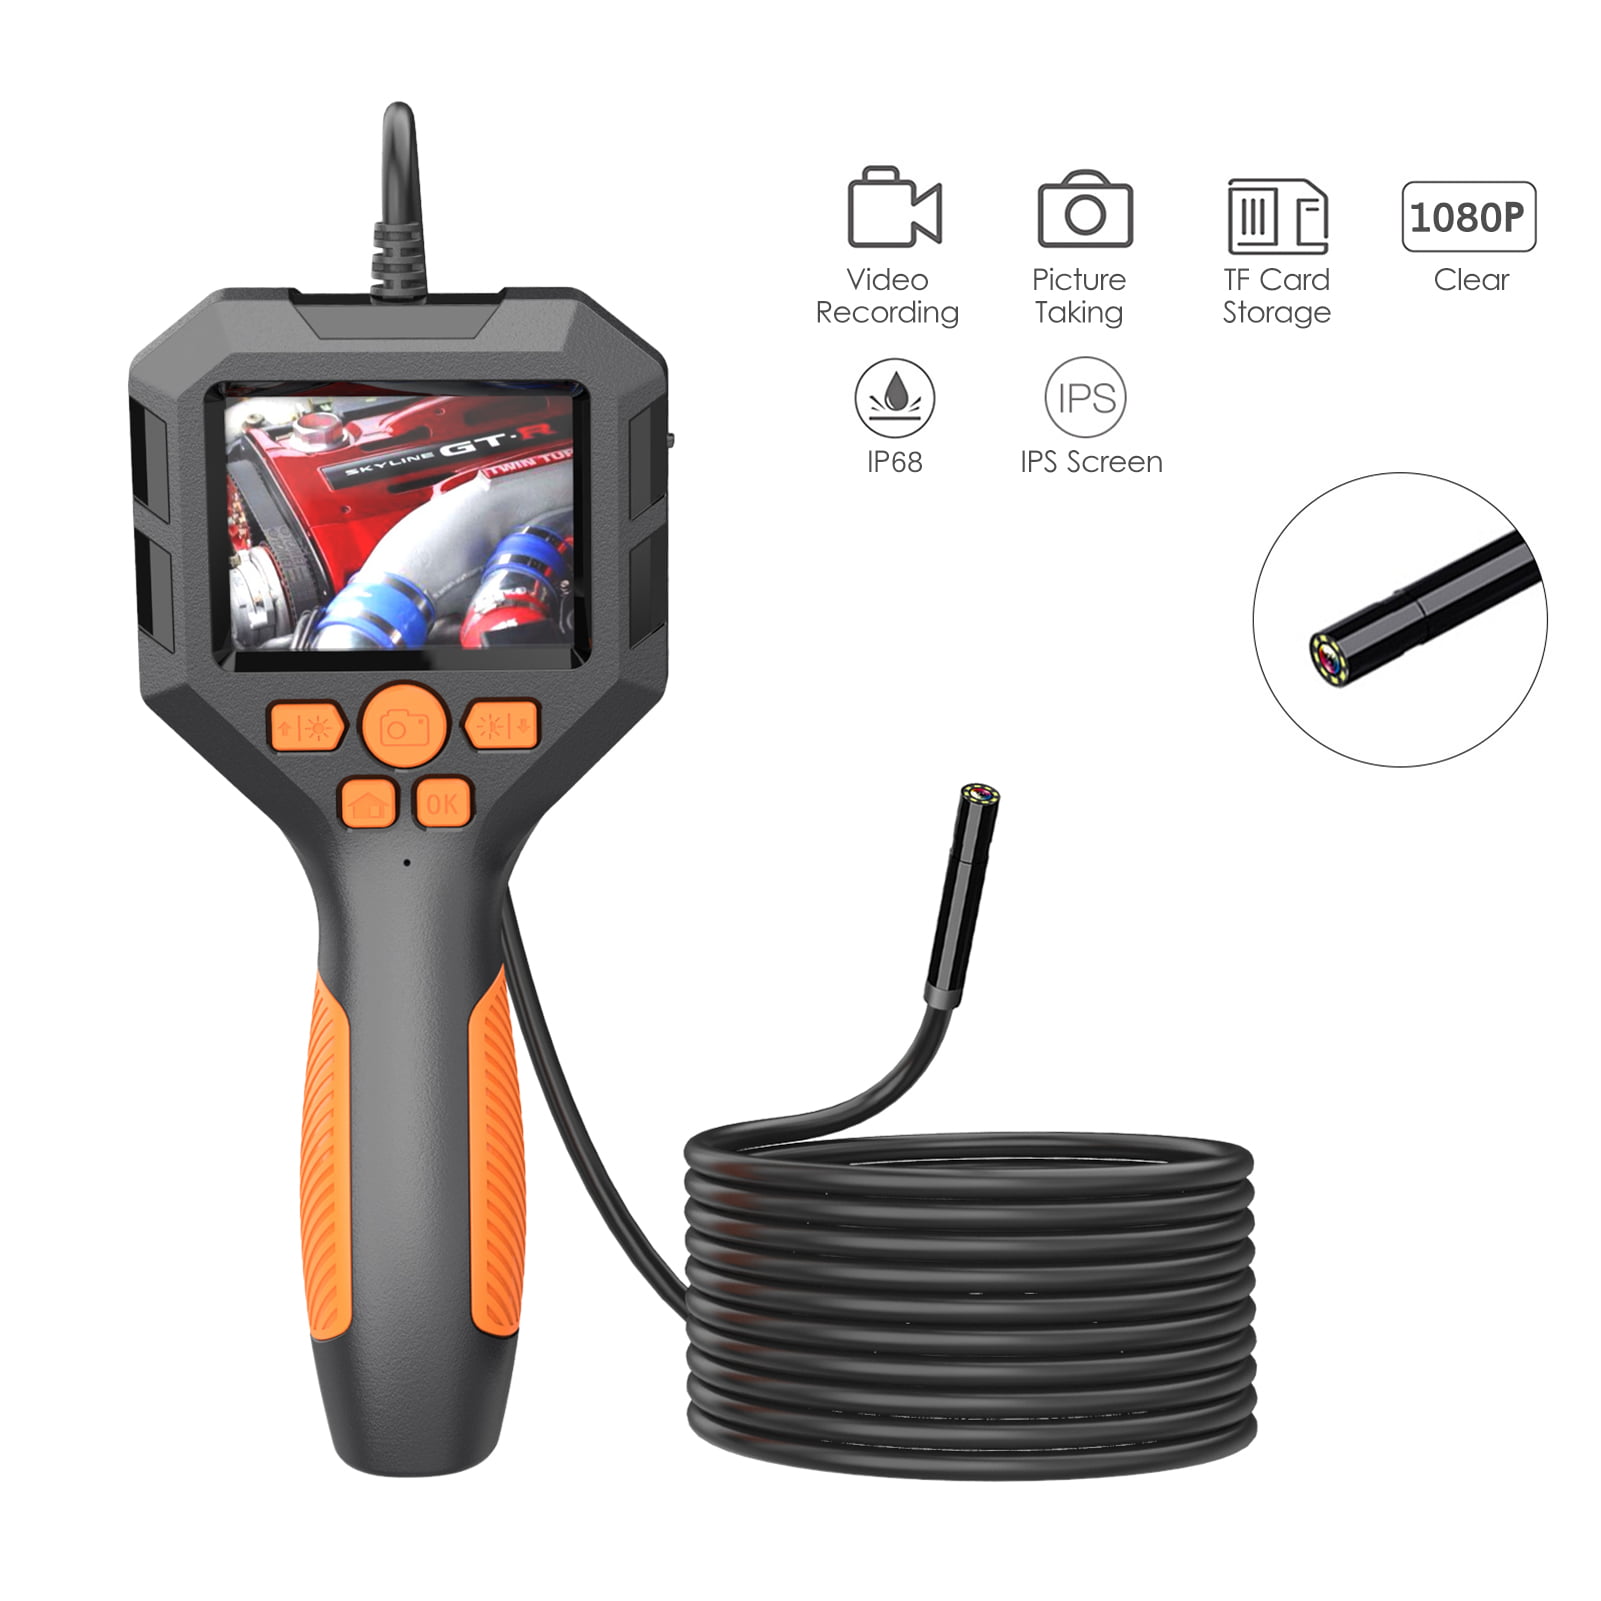 DEPSTECH Wireless Endoscope Camera with Light, 5.0MP HD Inspection Camera  Waterproof Borescope, Snake Camera, 16.5FT Semi-Rigid Cable for iPhone  Android 